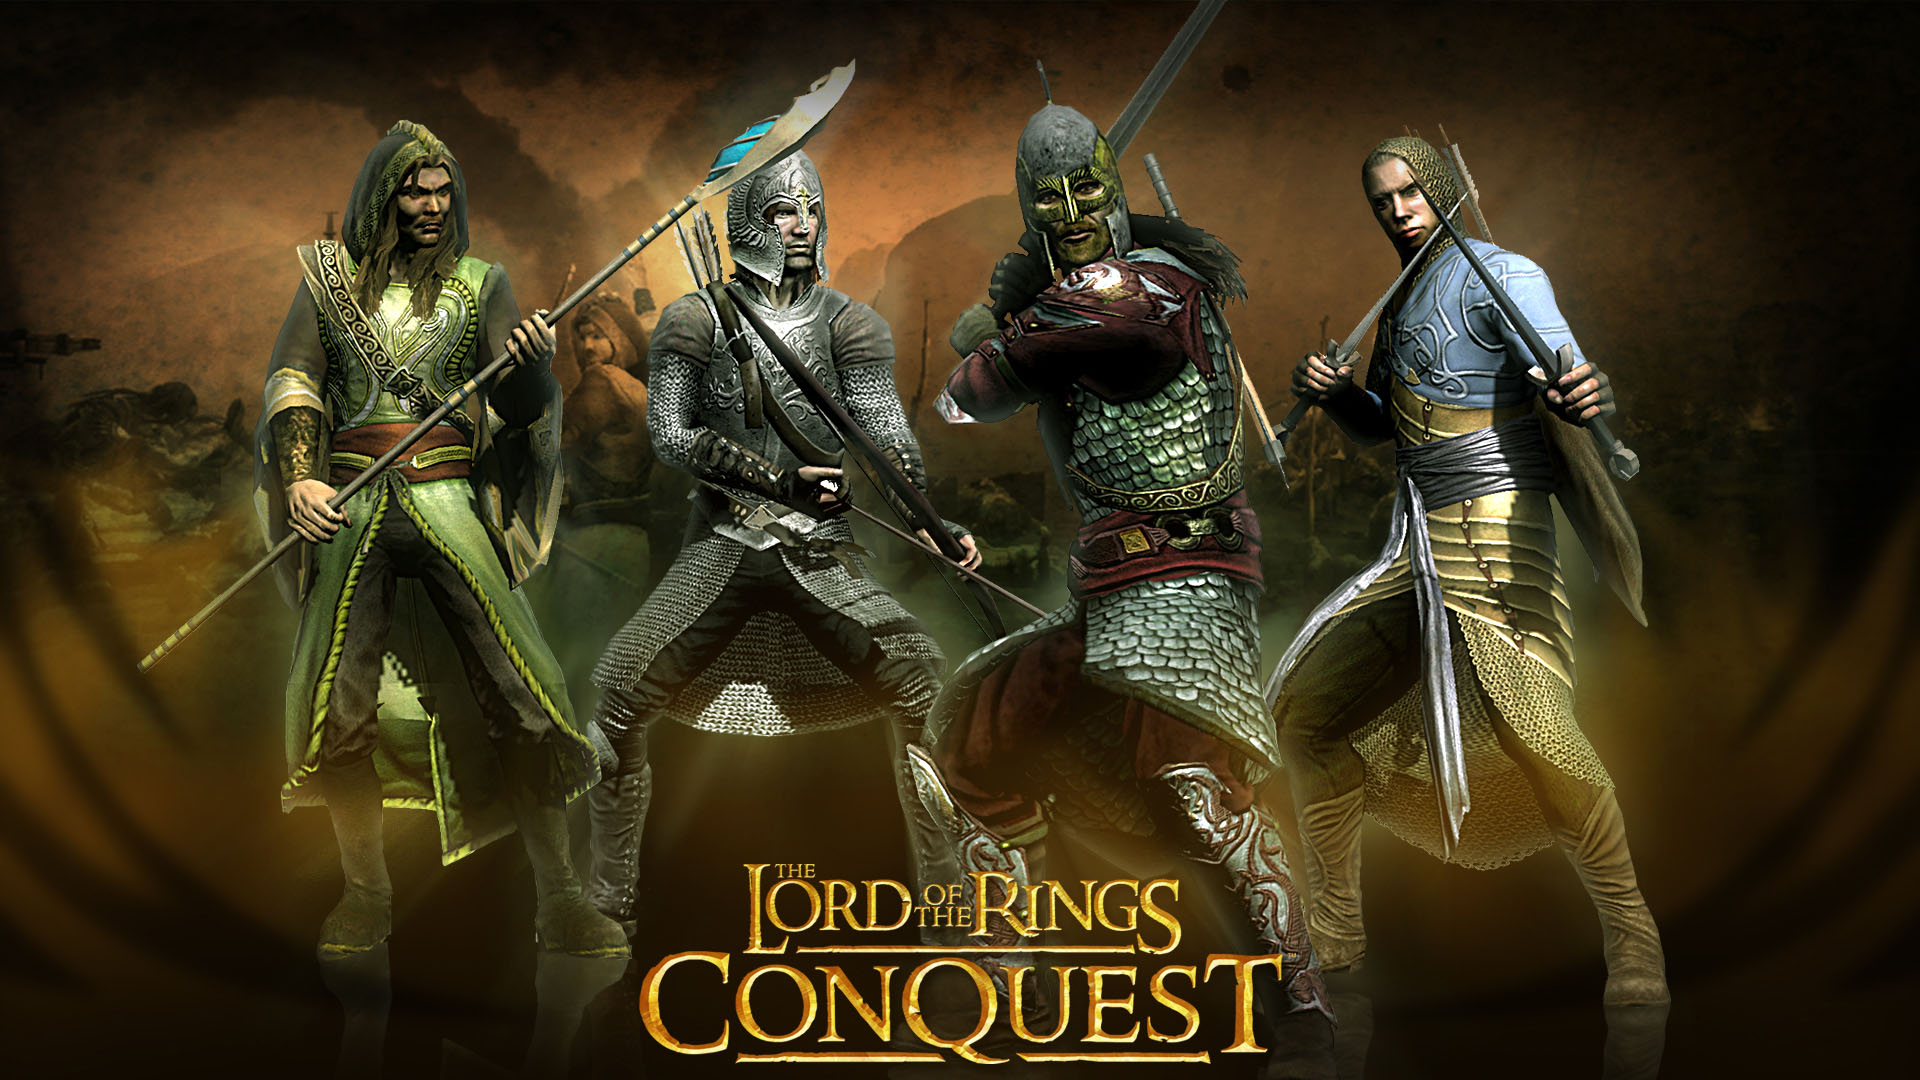 the-lord-of-the-rings-conquest-in-de-ban-van-de-ring-wiki-fandom-powered-by-wikia